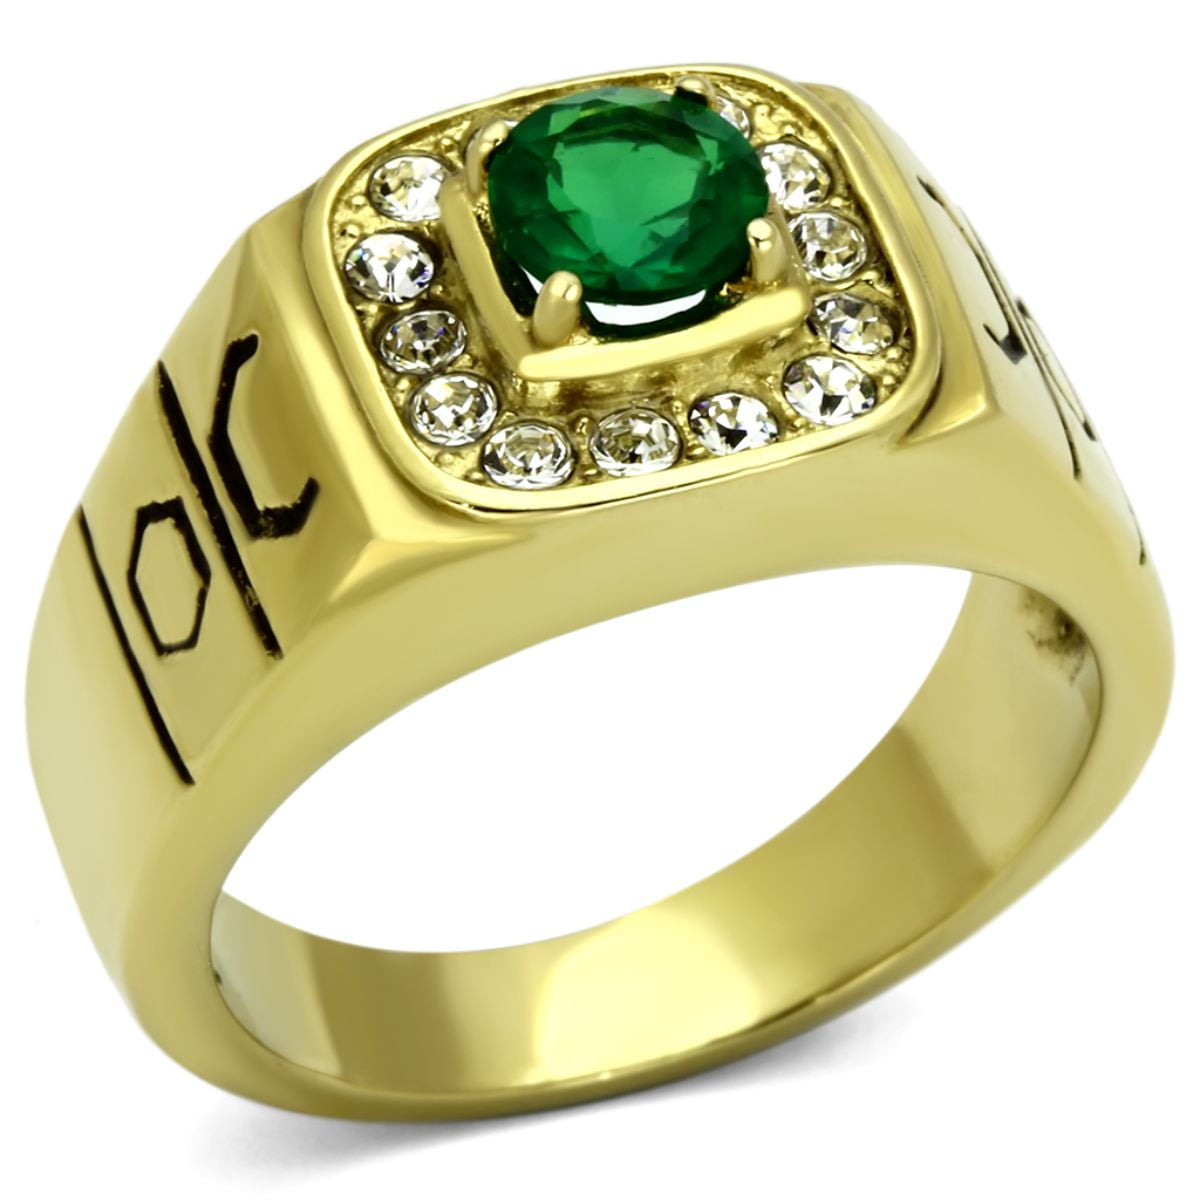 Blake's 14K Solid Yellow Gold Ring for Men with Green Emerald and 2 Diamond  Accents, Men Fine Jewelry for Dad Men Gifts for Him, Men's Jewelry (Size  5-15)|Amazon.com